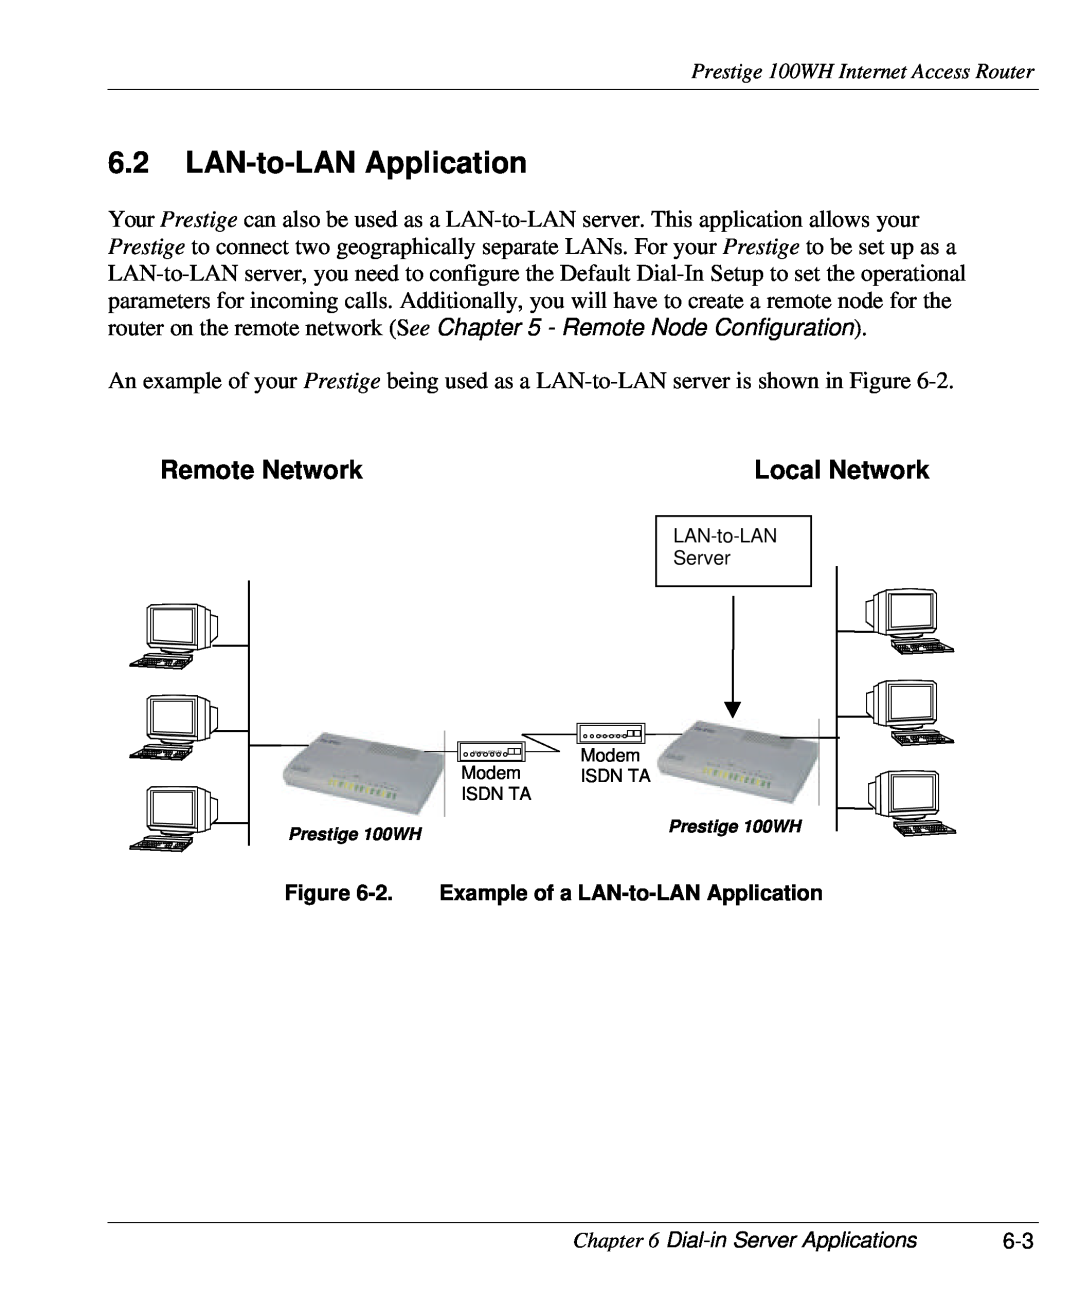 ZyXEL Communications 100WH user manual Remote Network, Local Network, 2. Example of a LAN-to-LAN Application 